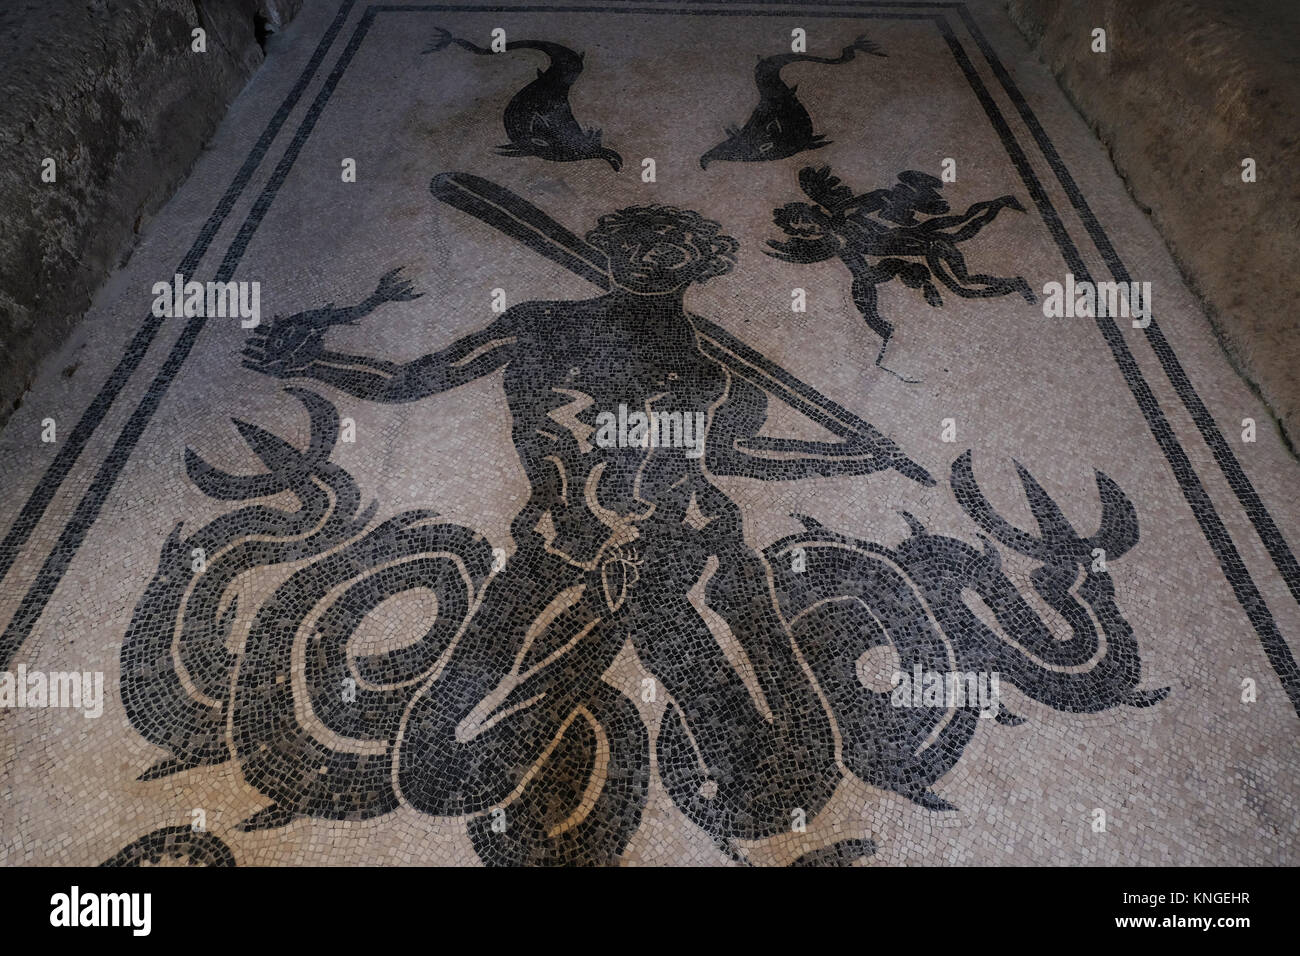 Floor mosaic at the baths at Herculaneum, depicting a mythical sea-god (Triton or Typhon?) and other sea creatures, Ercolano, Italy Stock Photo